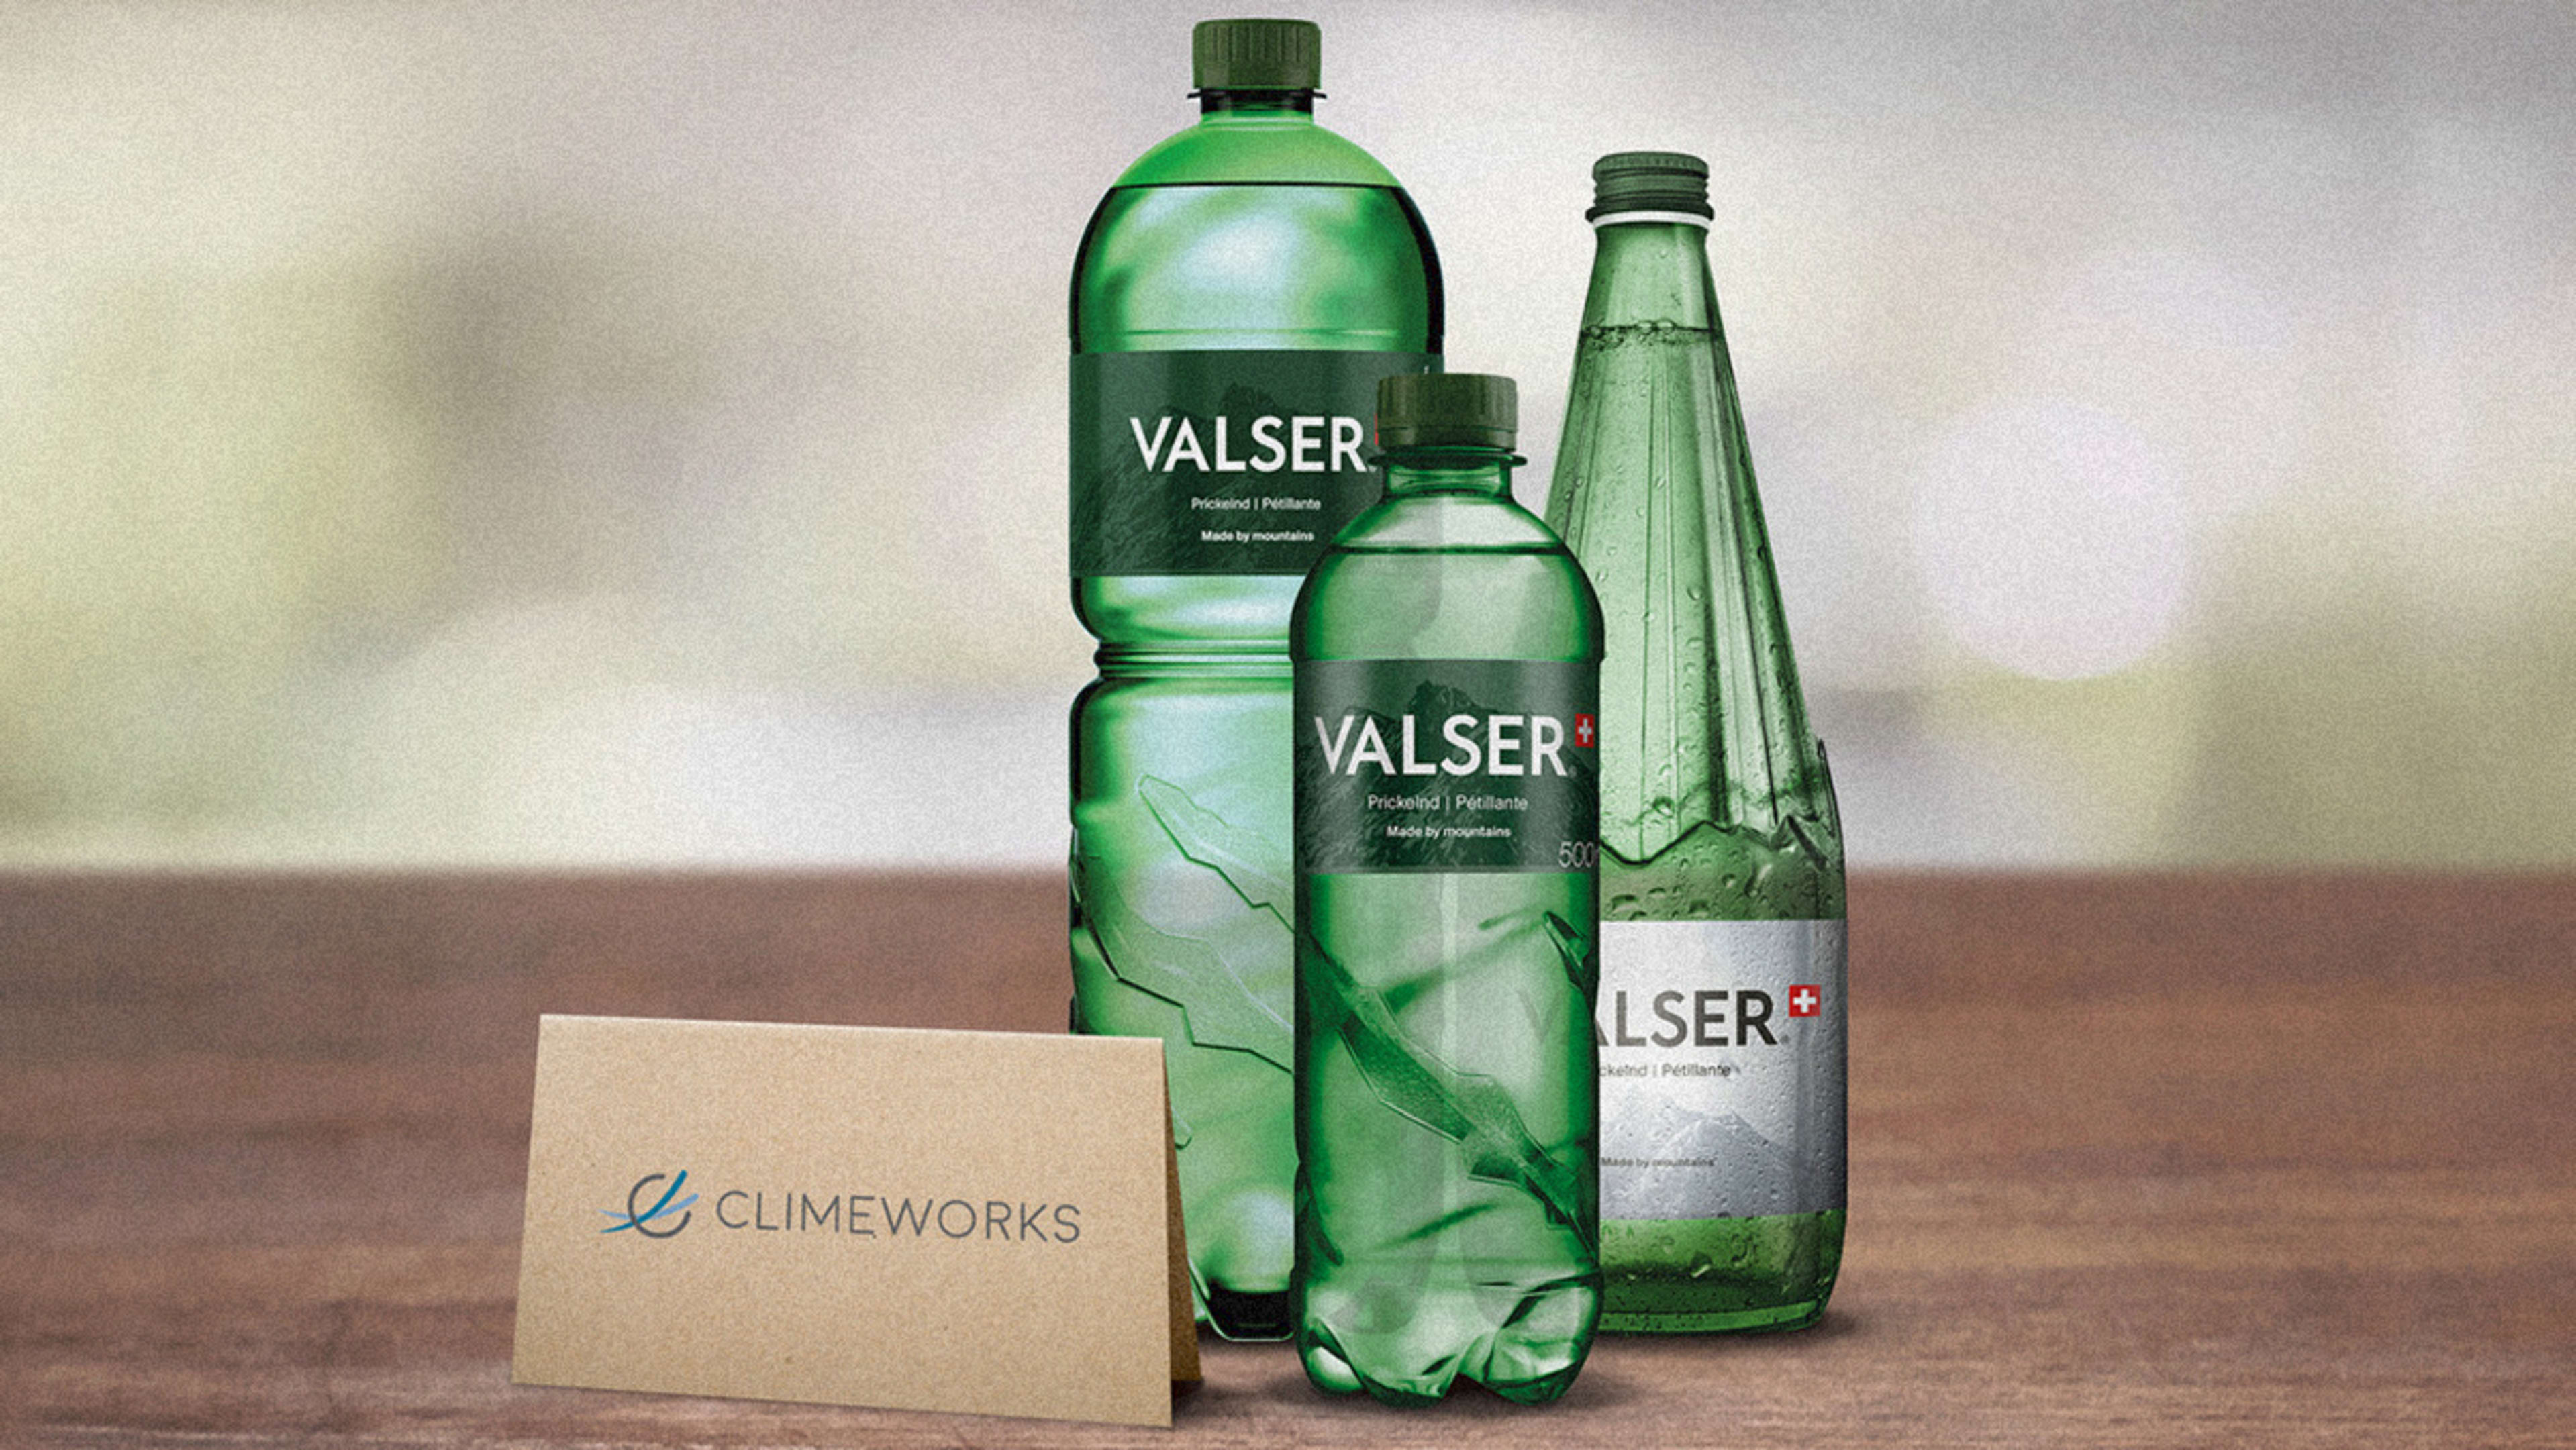 This sparkling water is the first drink to get its fizz from CO2 captured from the atmosphere